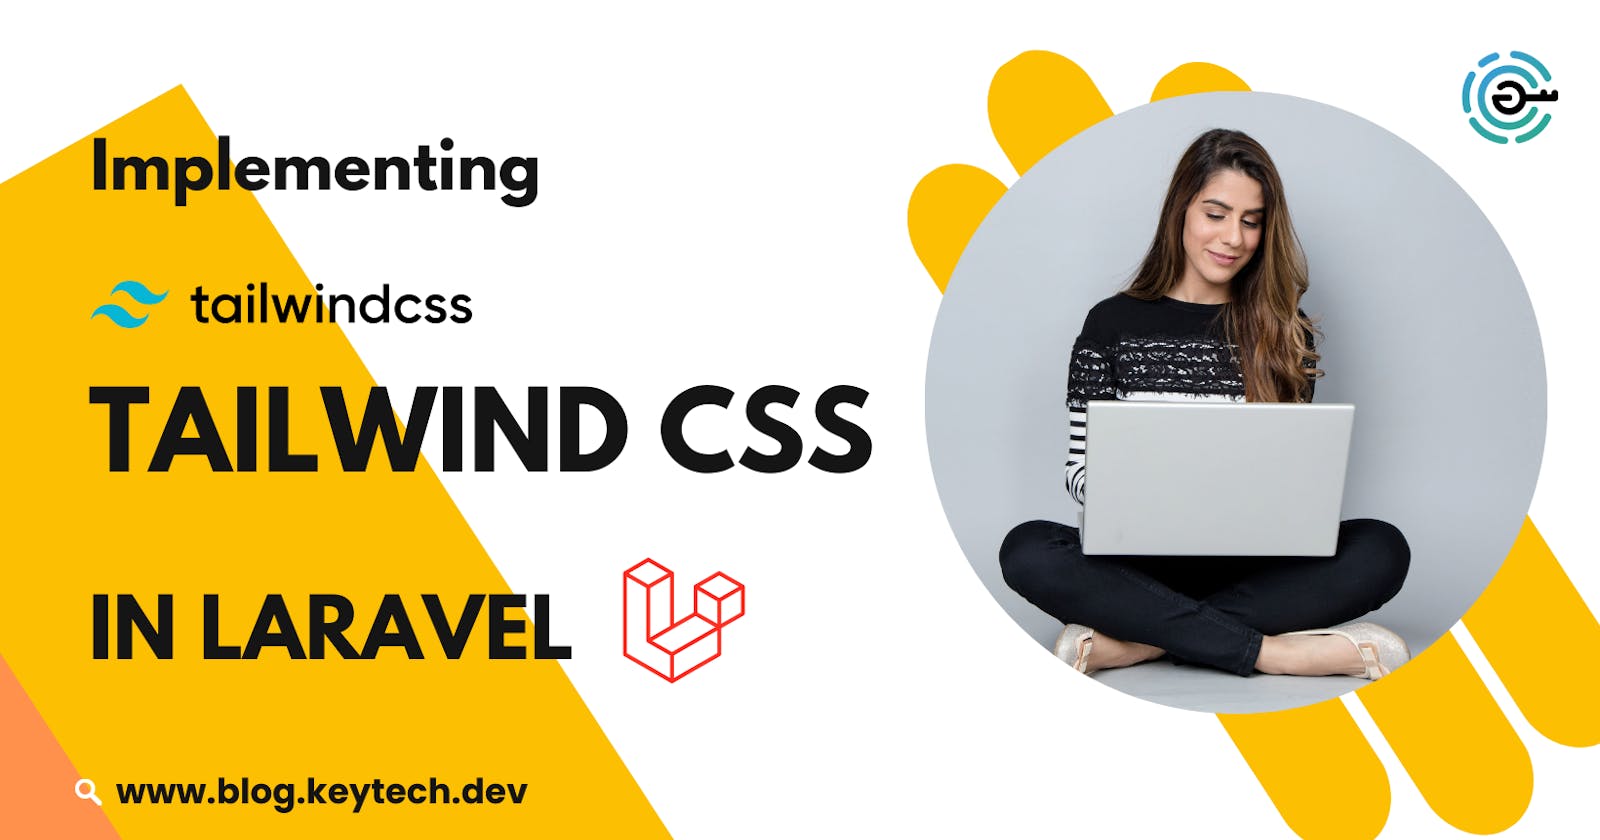 Implementing Tailwind CSS in Laravel: Pros, Cons, and Examples.